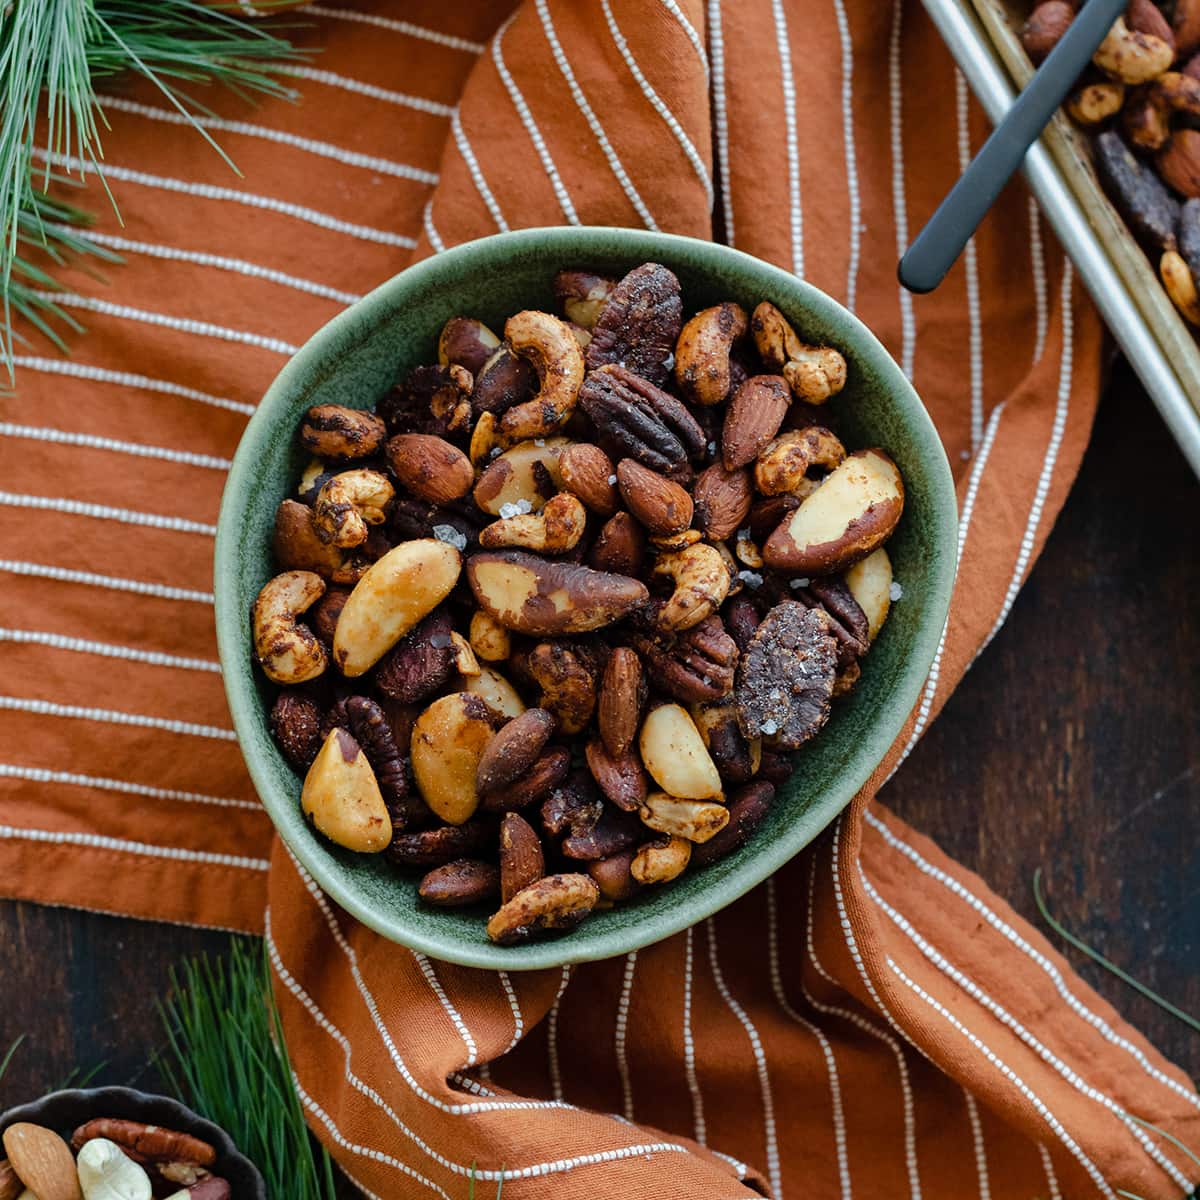 Mixed roasted nuts in a green bowl on an orange and white striped napkin. Pine needles peeking into the shot in the top left and bottom left corner.